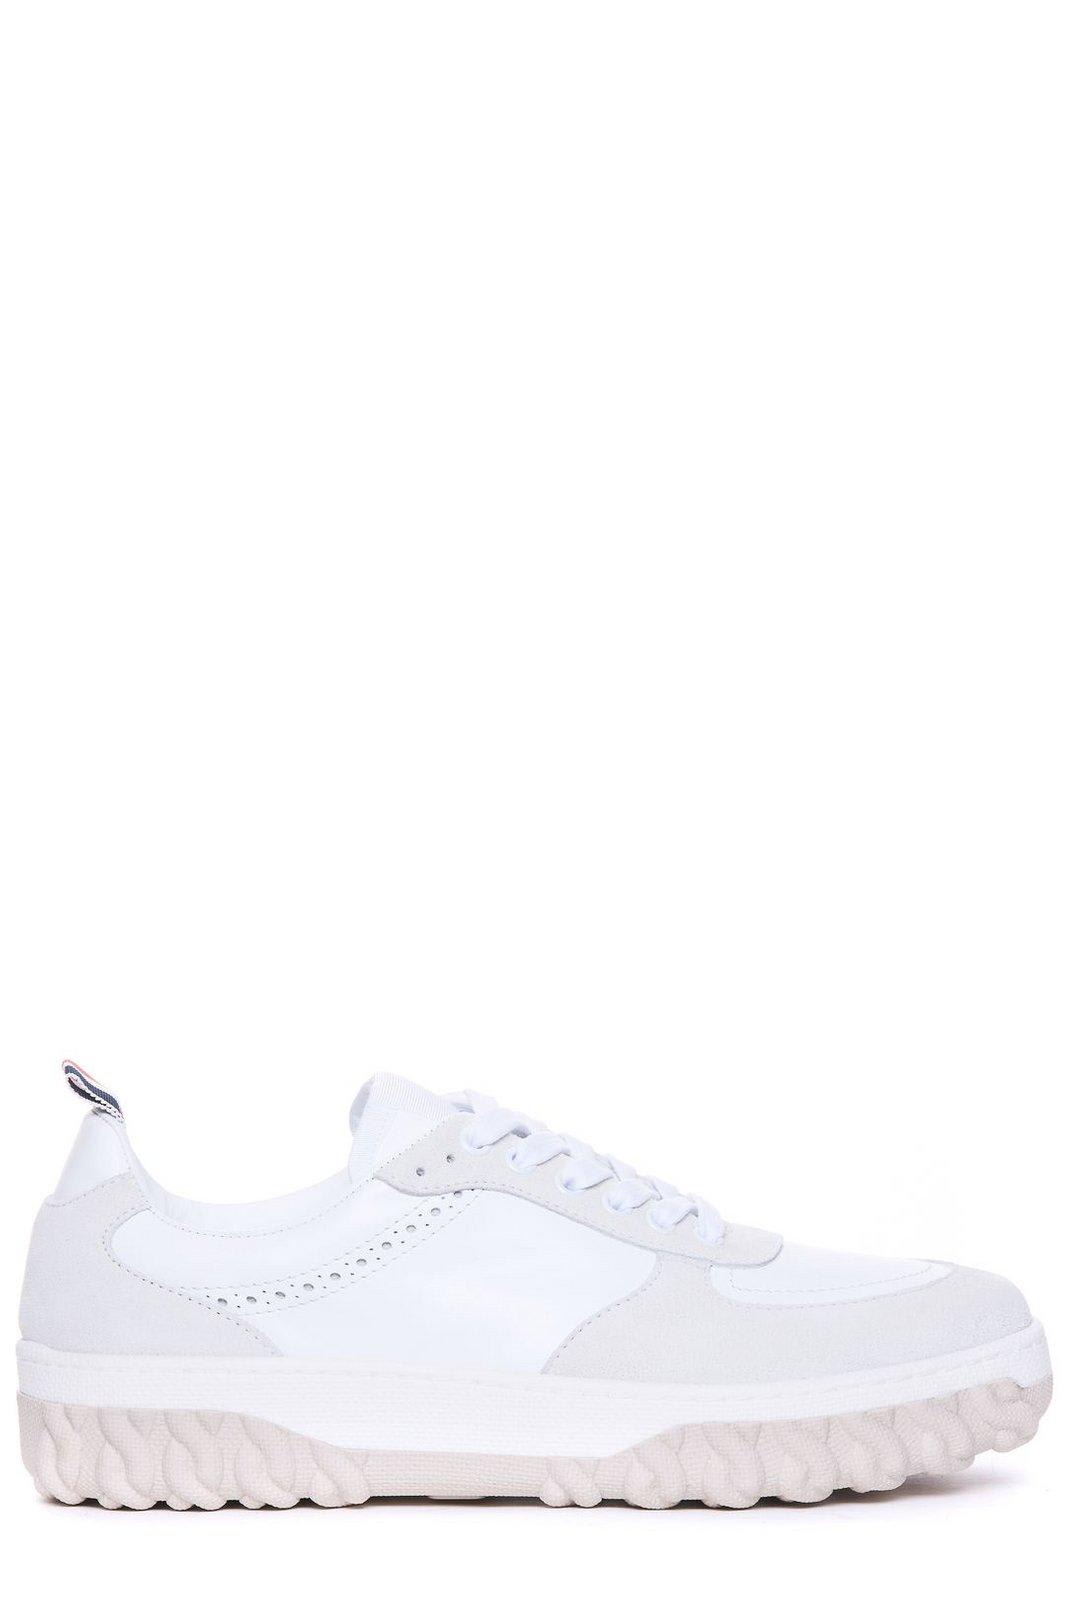 Thom Browne Letterman Panelled Low-top Sneakers In White